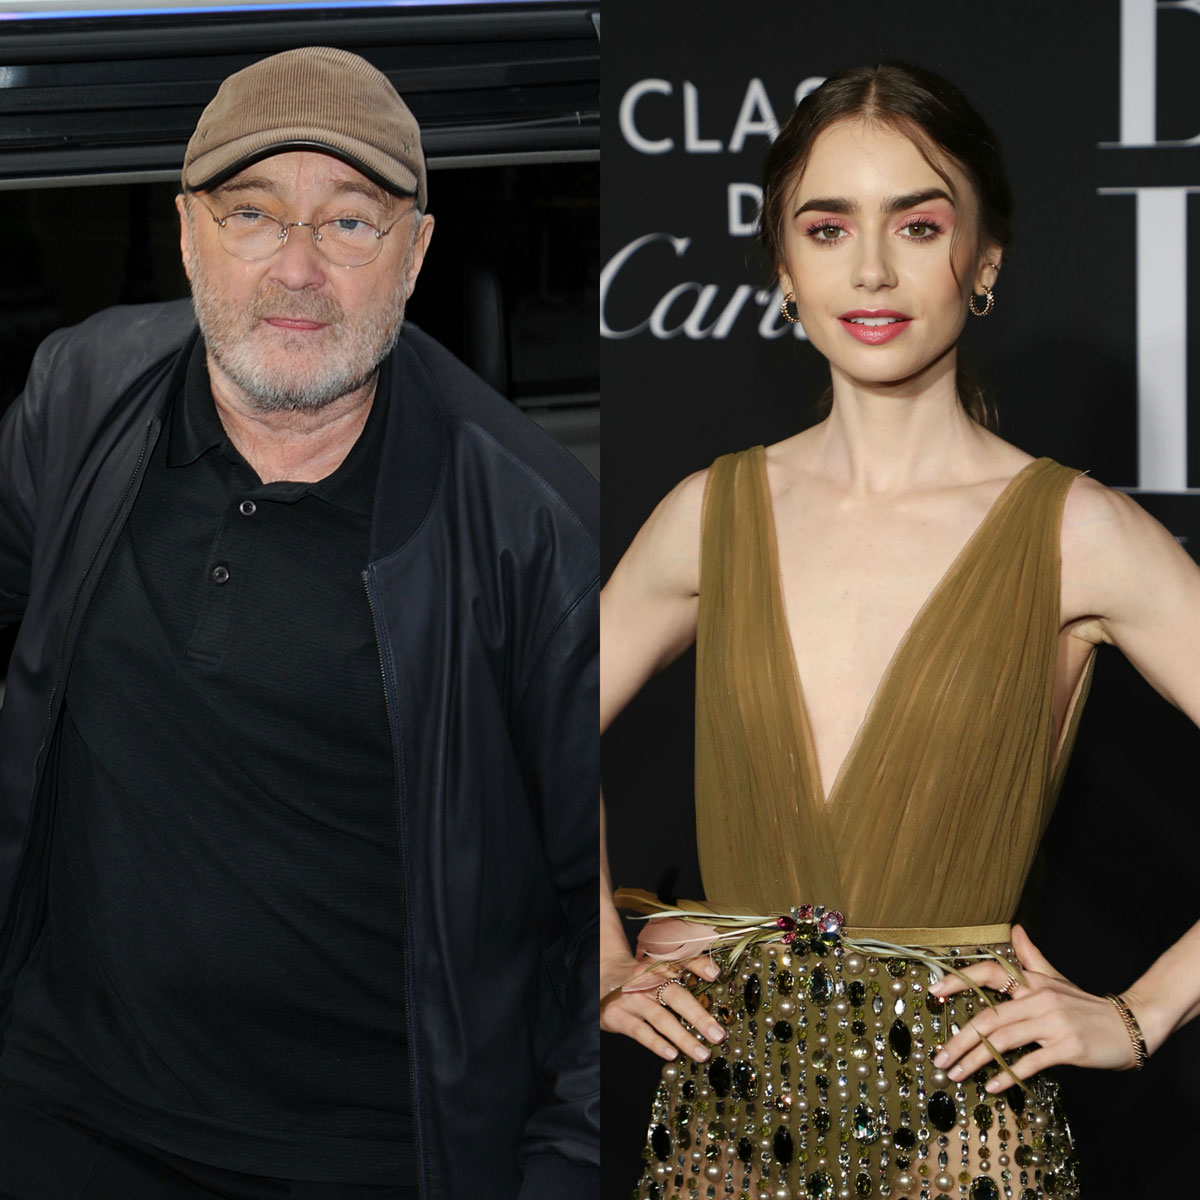 Phil Collins and Lily Collins are related